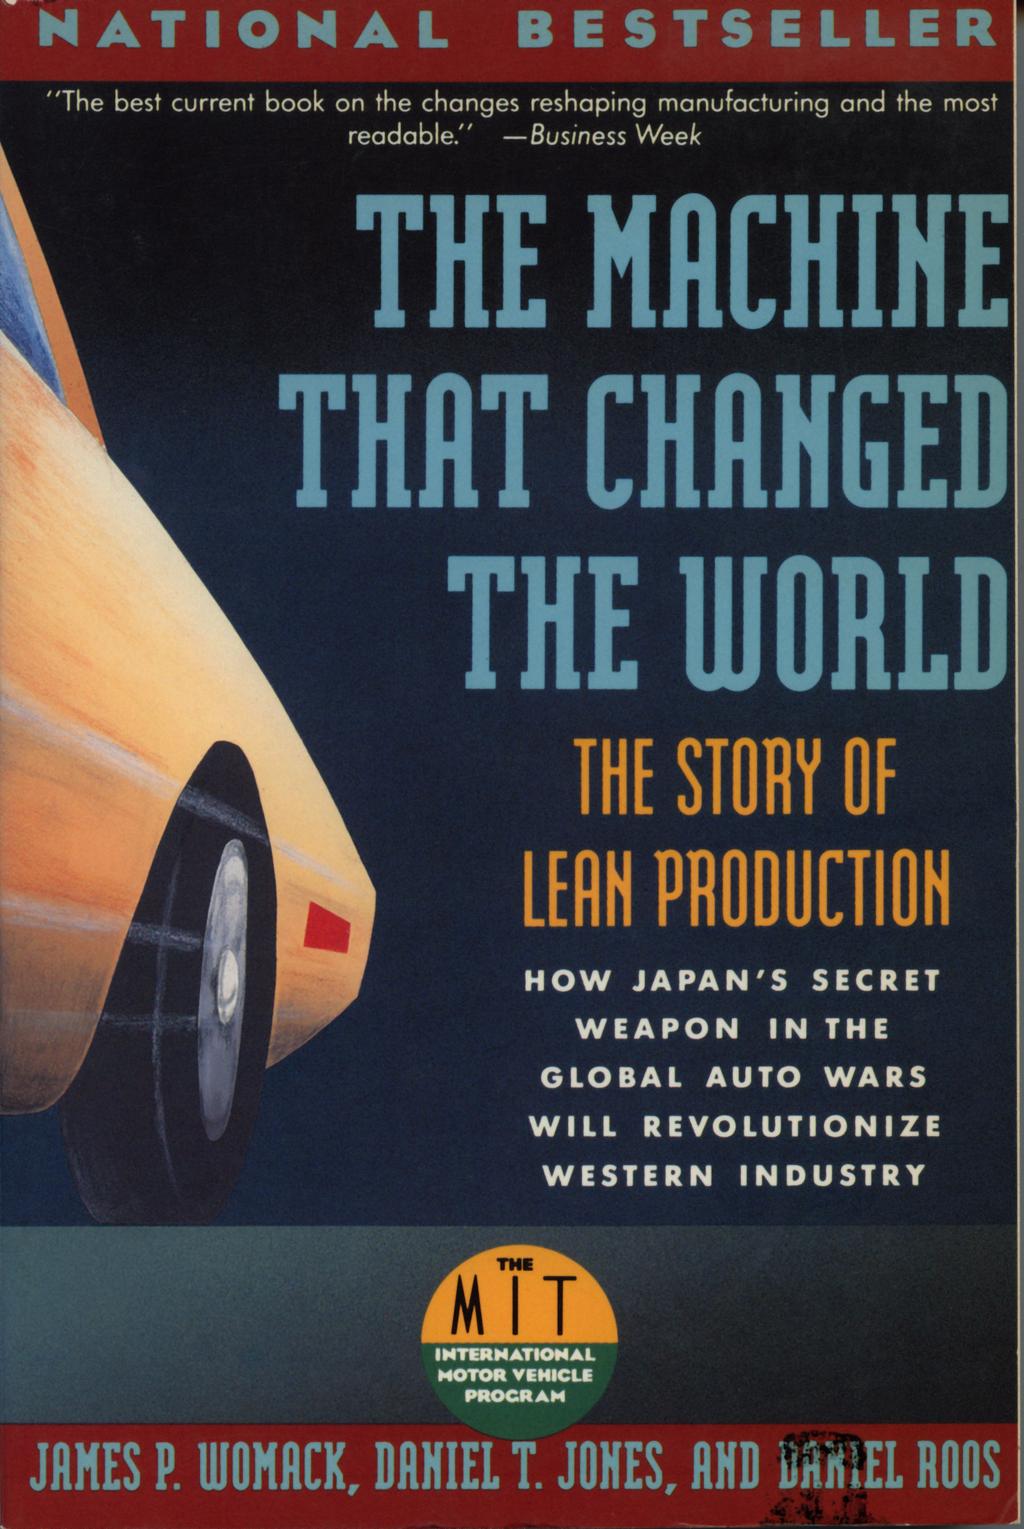 REFERENCES ON THE TOYOTA PRODUCTION SYSTEM; Taiichi Ohno, The Toyota Production System Productivity Press 1988 Shigeo Shingo, A Study of the Toyota Production System Productivity Press 1989 Yasuhiro